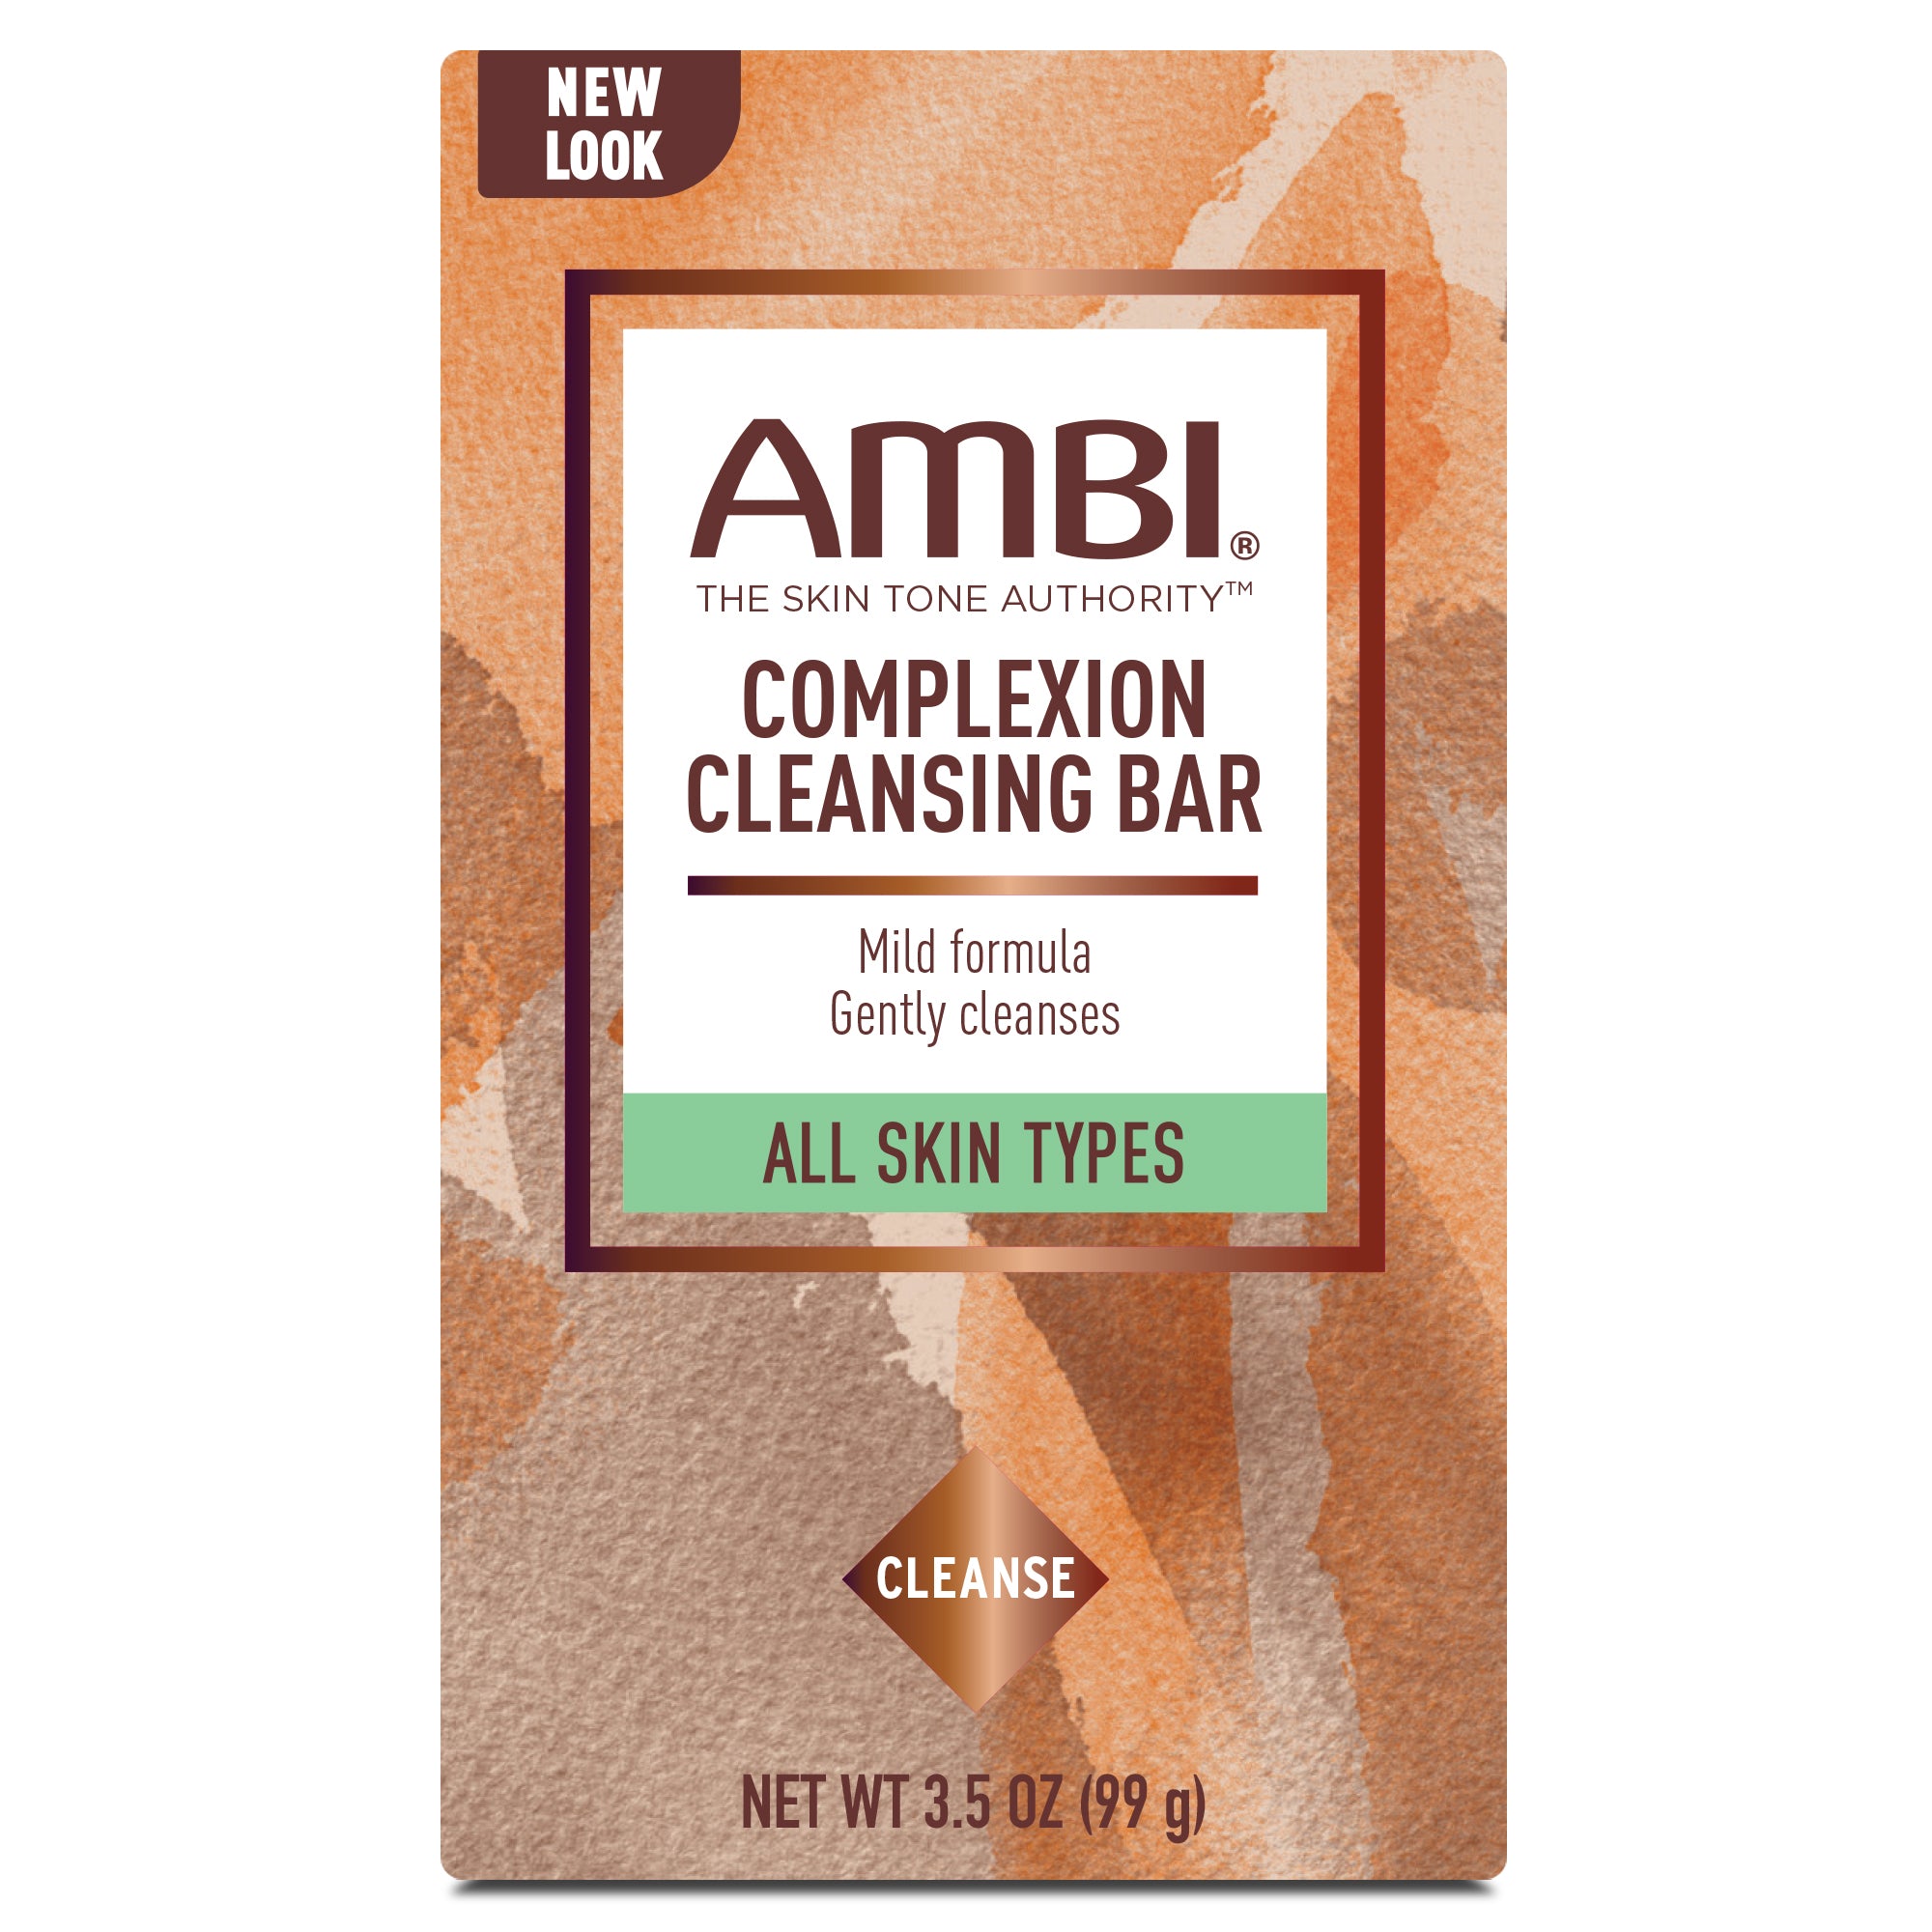 Complexion Cleansing Bar